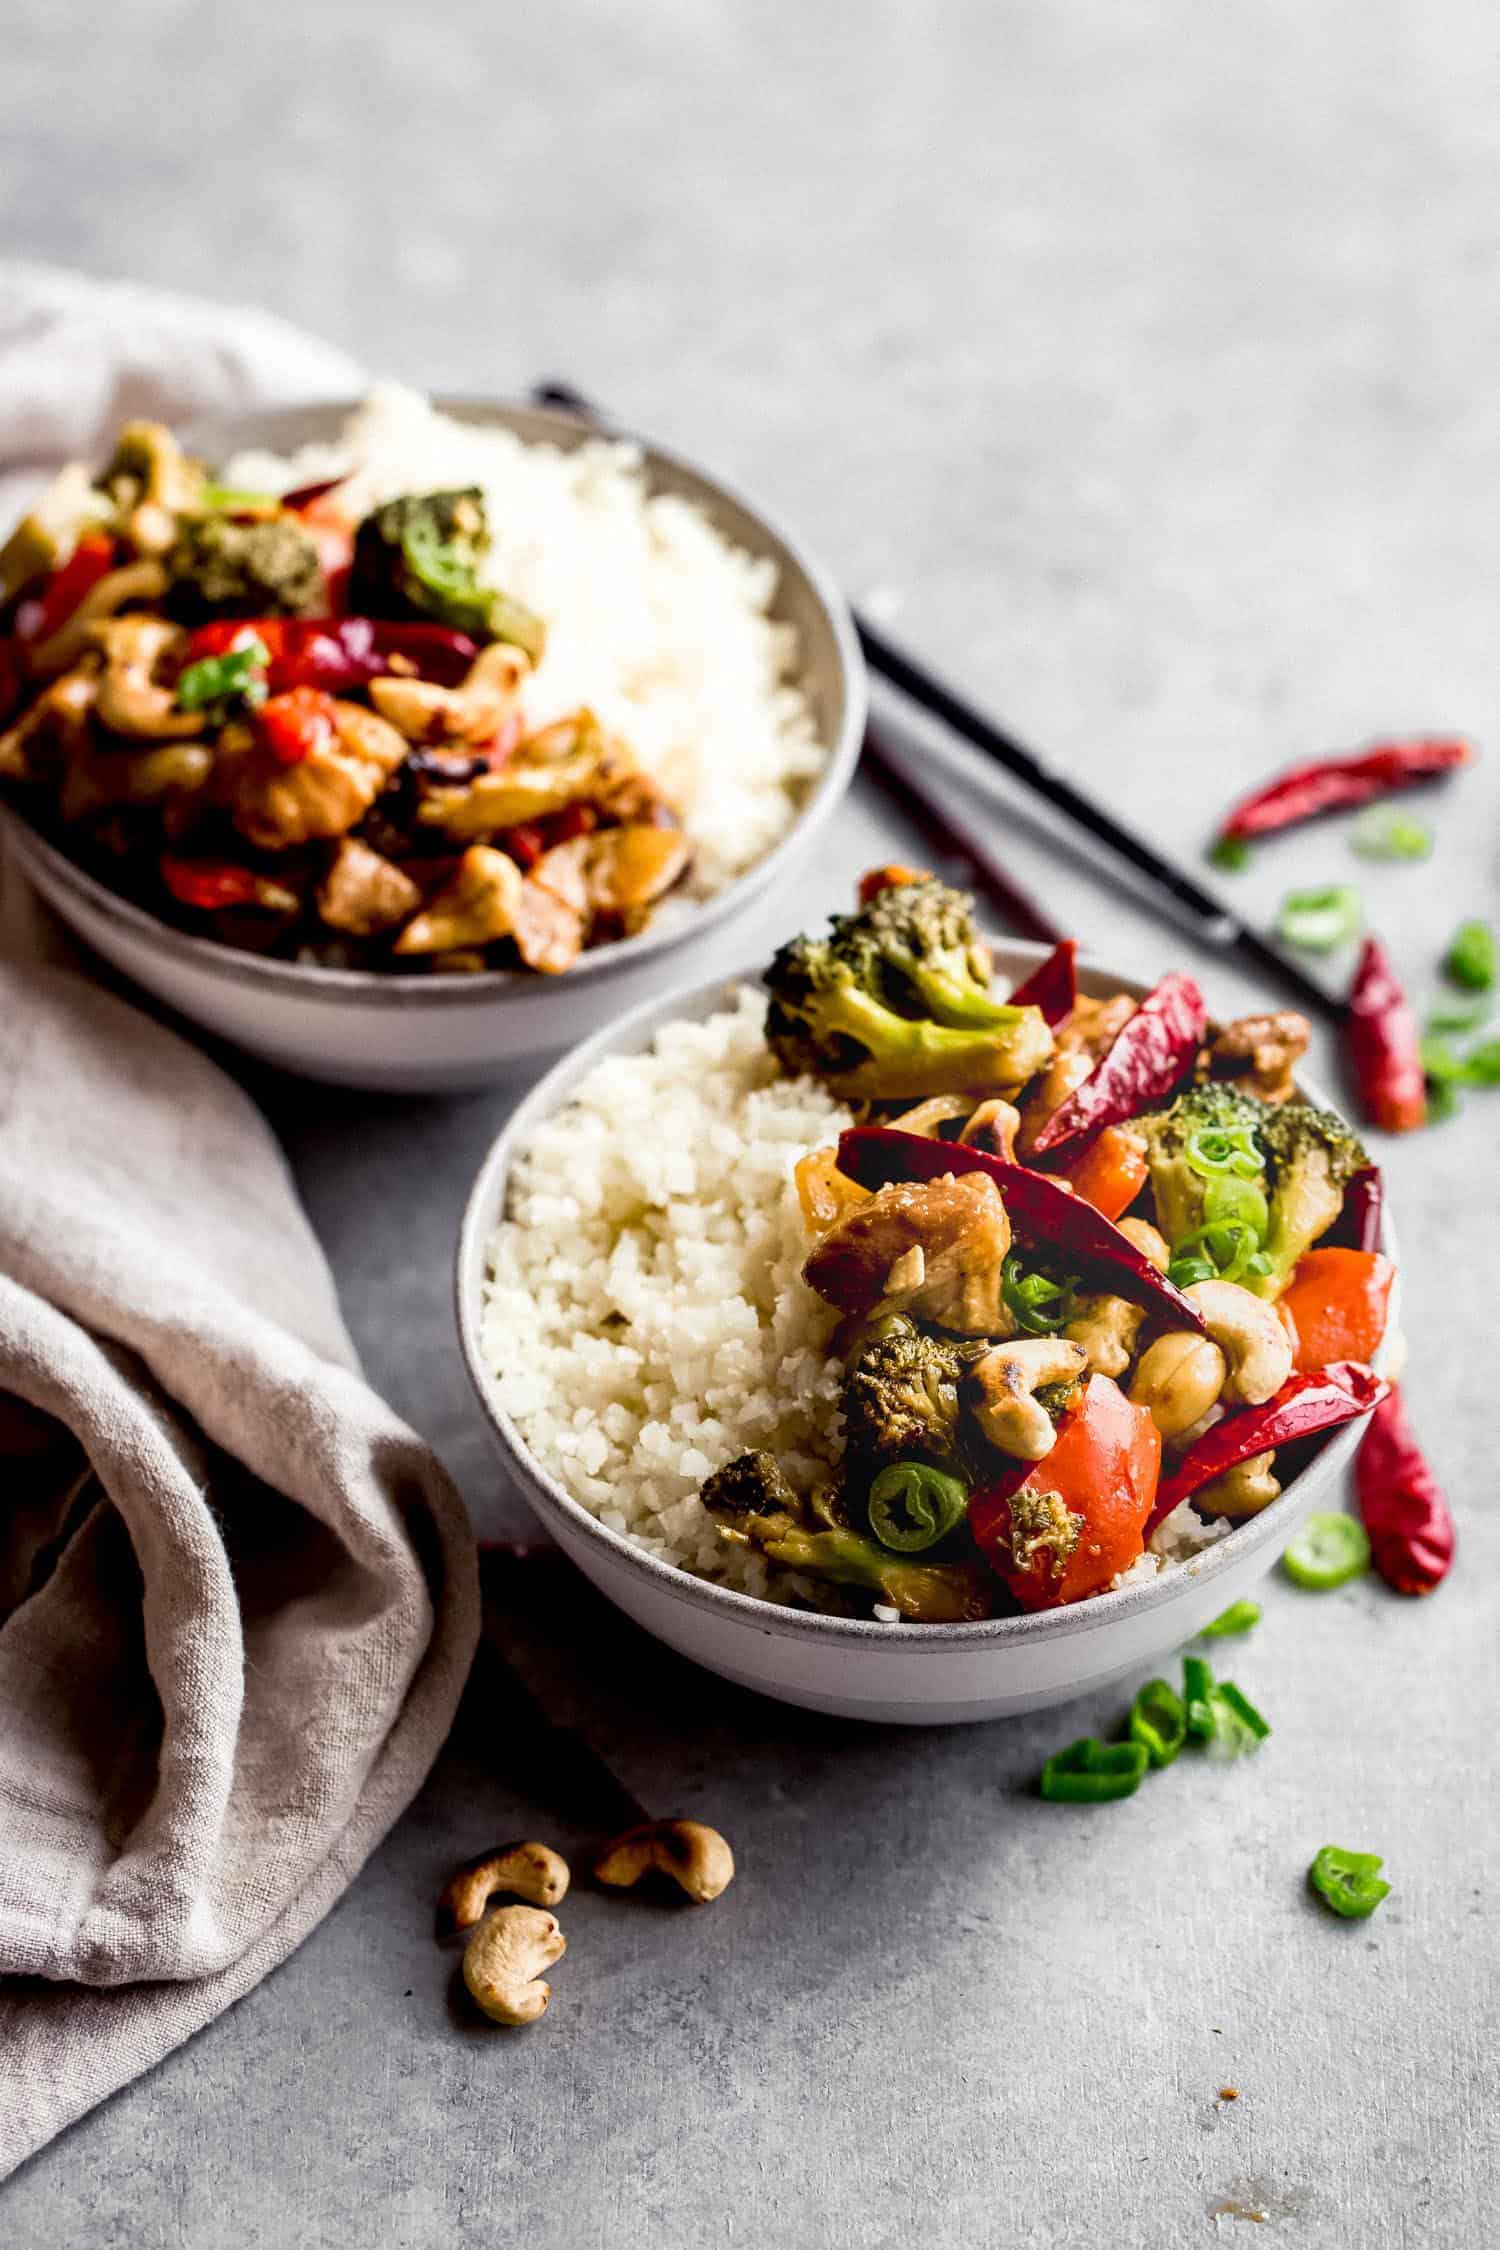 Chicken, cashews, vegetables and rice in two bowls